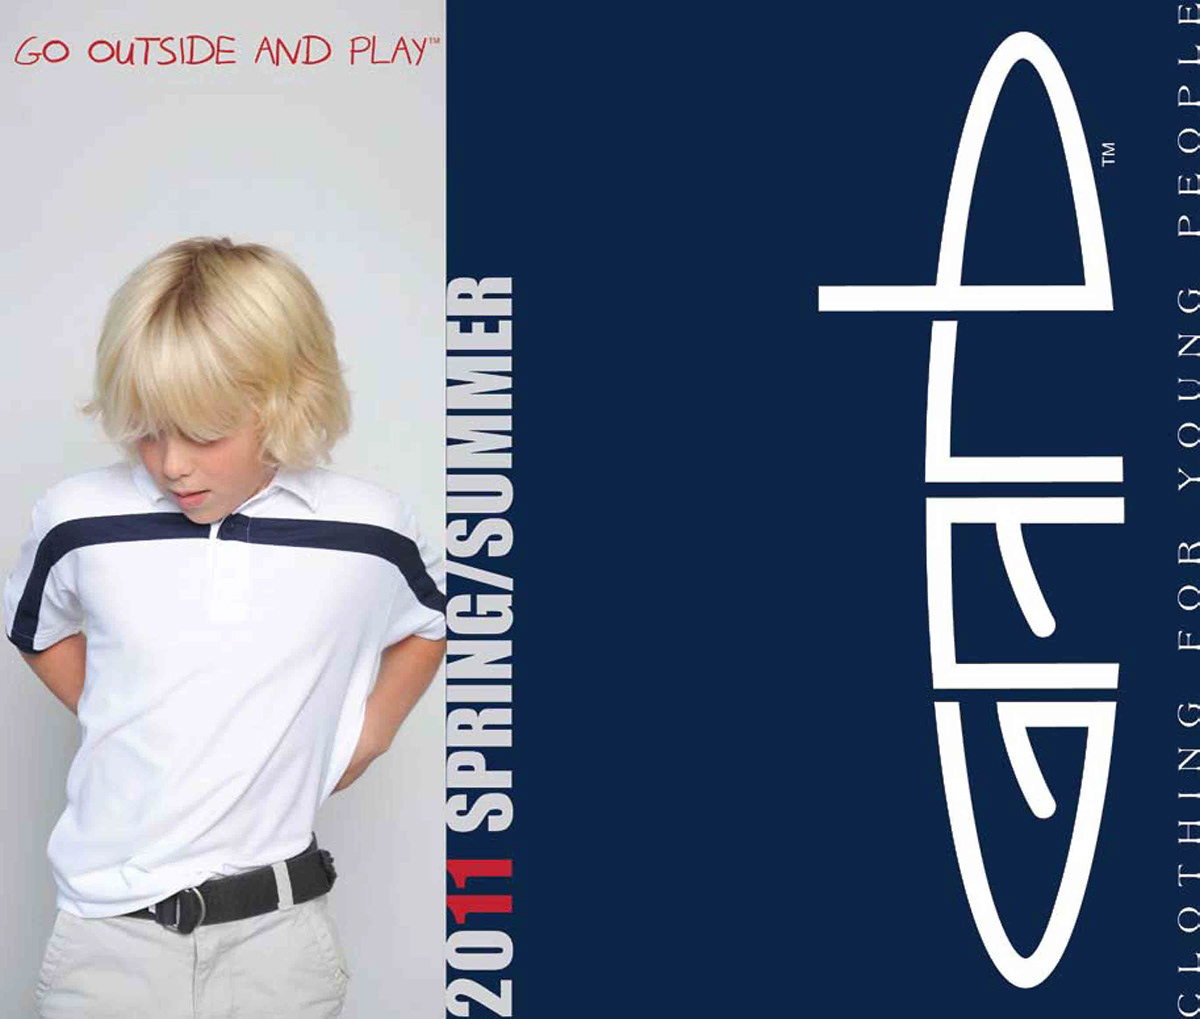 garb Kids Golf Appareal page layout photo editing Illustrator InDesign Melissa D. Zier